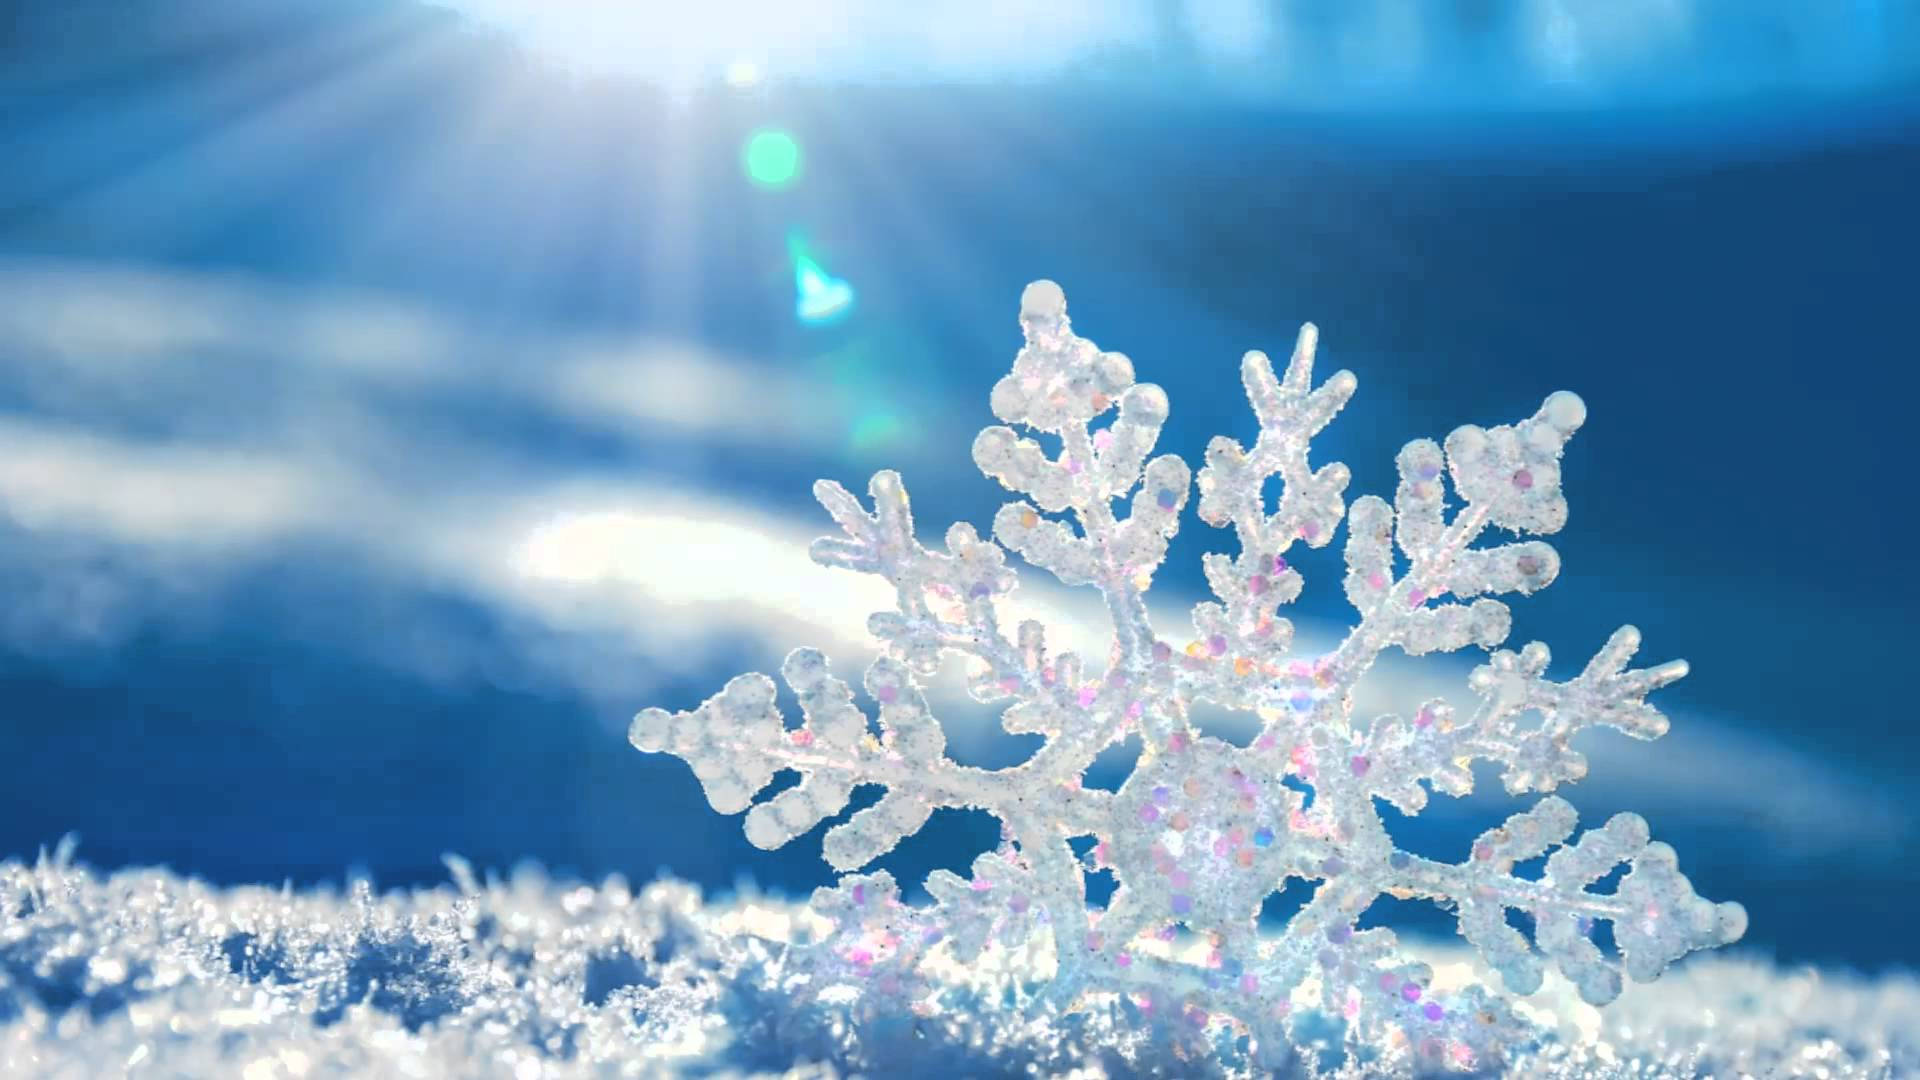 Snow Aesthetic Wallpaper & Background For FREE